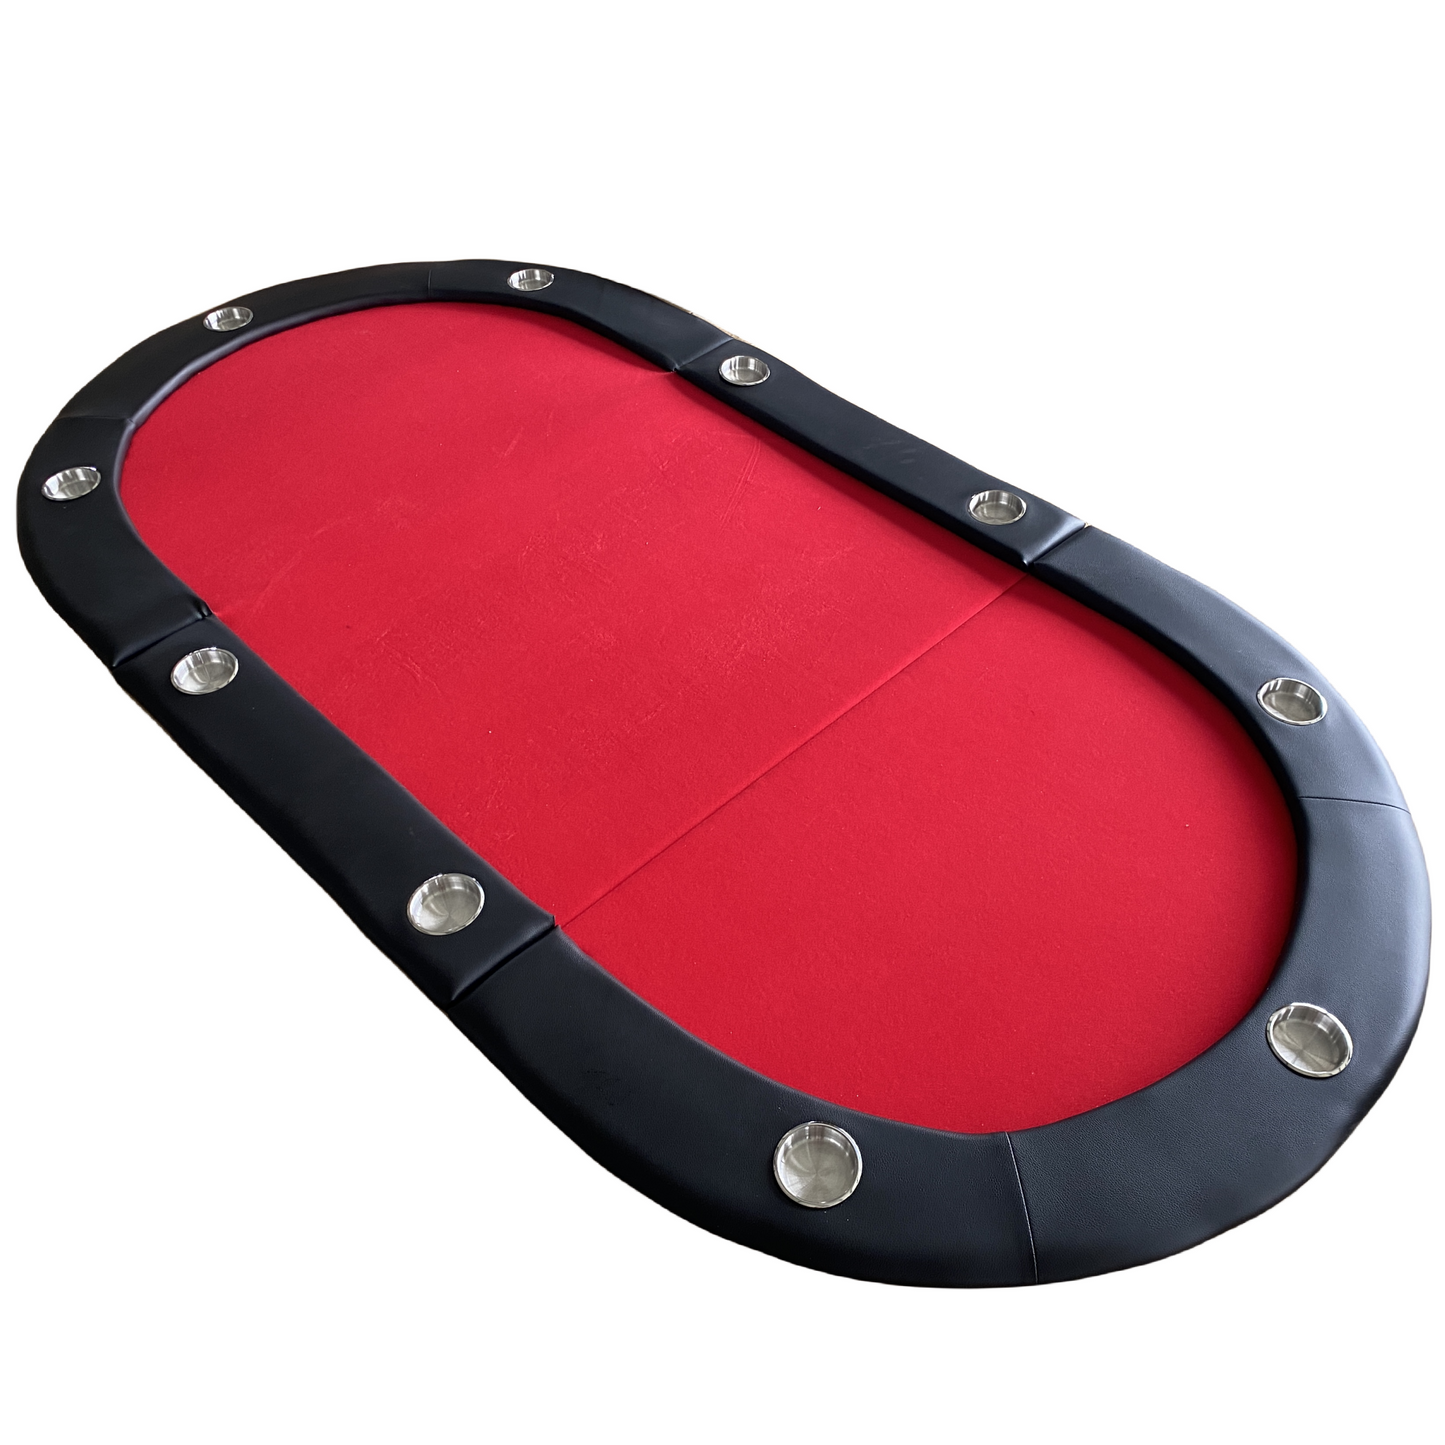 84" 10 Player Texas Hold'em Folding Poker Table Top with Carrying Bag